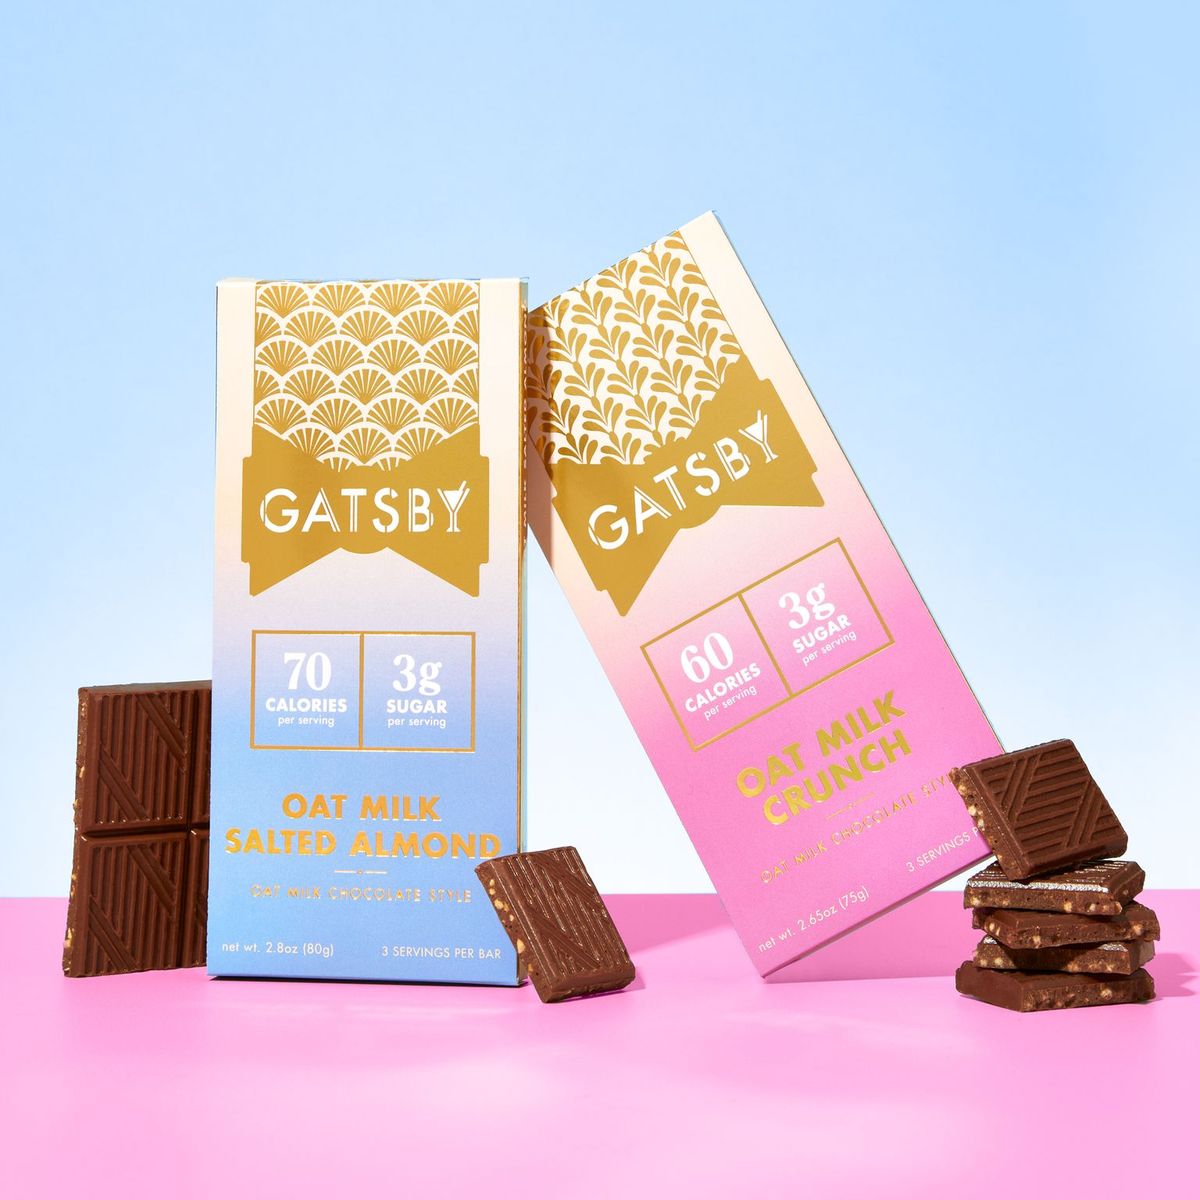 GATSBY Launches First Vegan and Low-Calorie Oat Milk Chocolate Bars